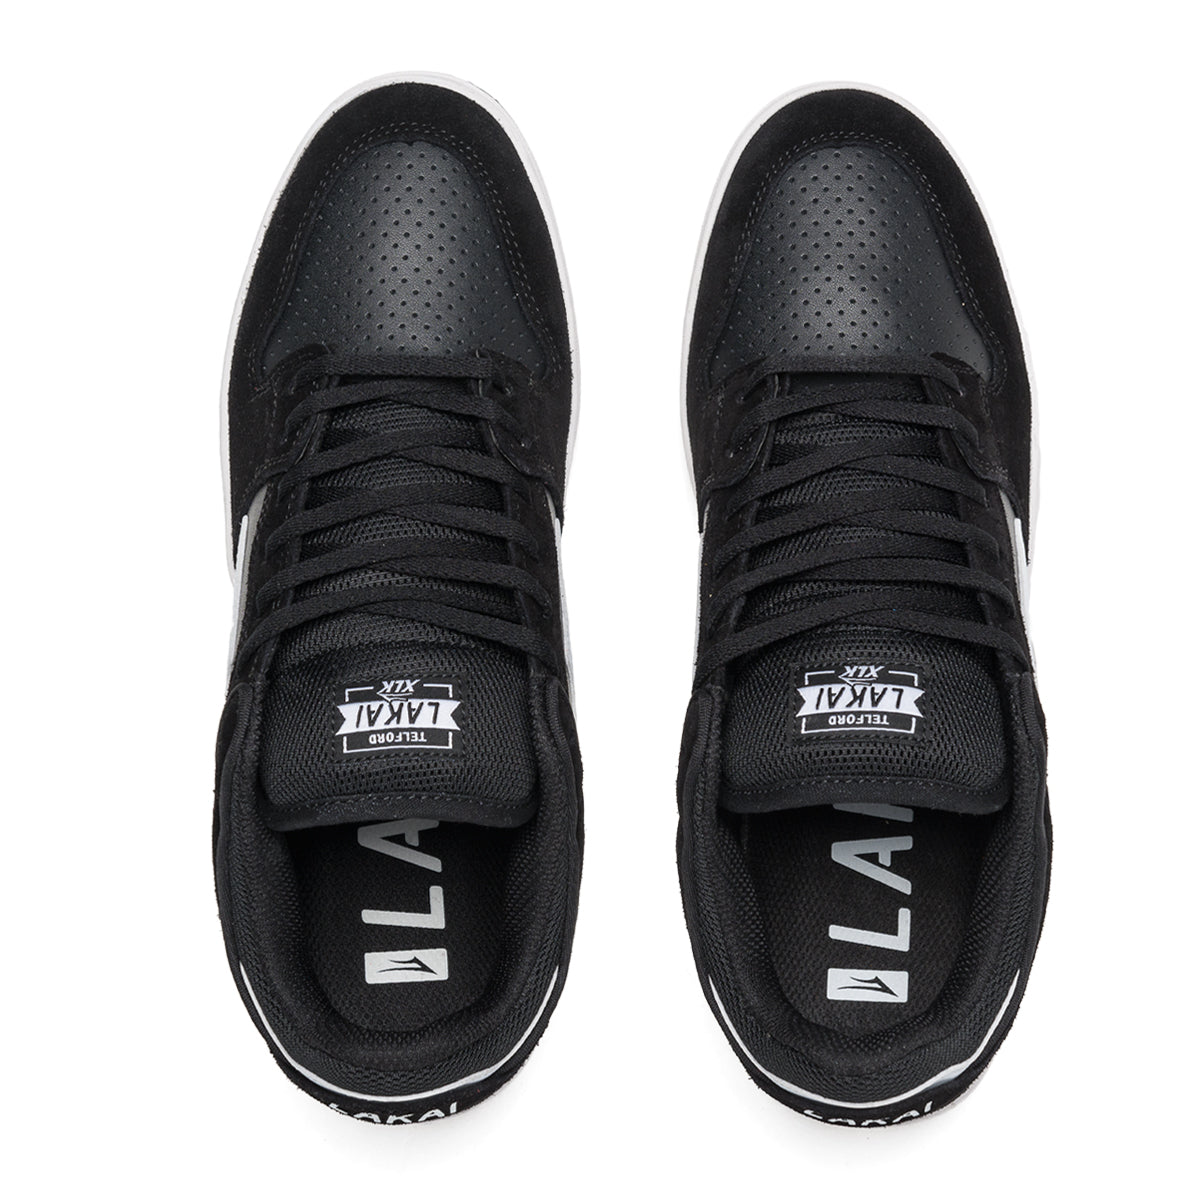 Lakai - Telford Low Black / White Suede Skateboard Shoes - Invisible Board Shop